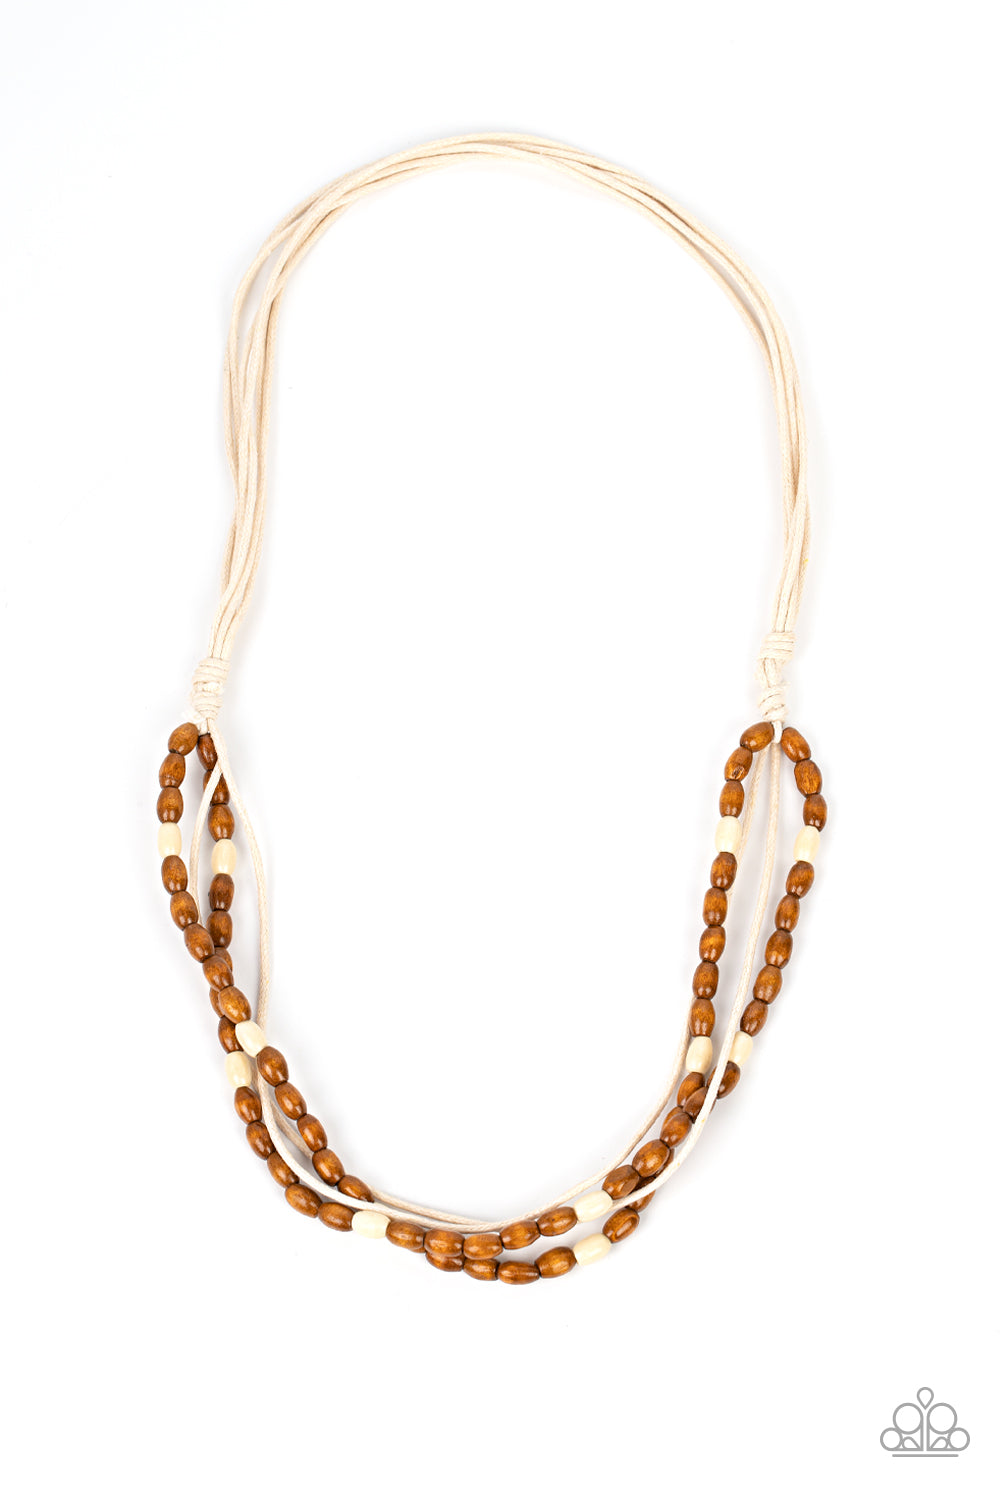 Paparazzi Accessories - Summer Odyssey - White Wood Necklace infused with layers of white cording, strands of brown and white wooden beads layer across the chest for a beach inspired flair. Features an adjustable sliding knot closure. >  Sold as one individual necklace.